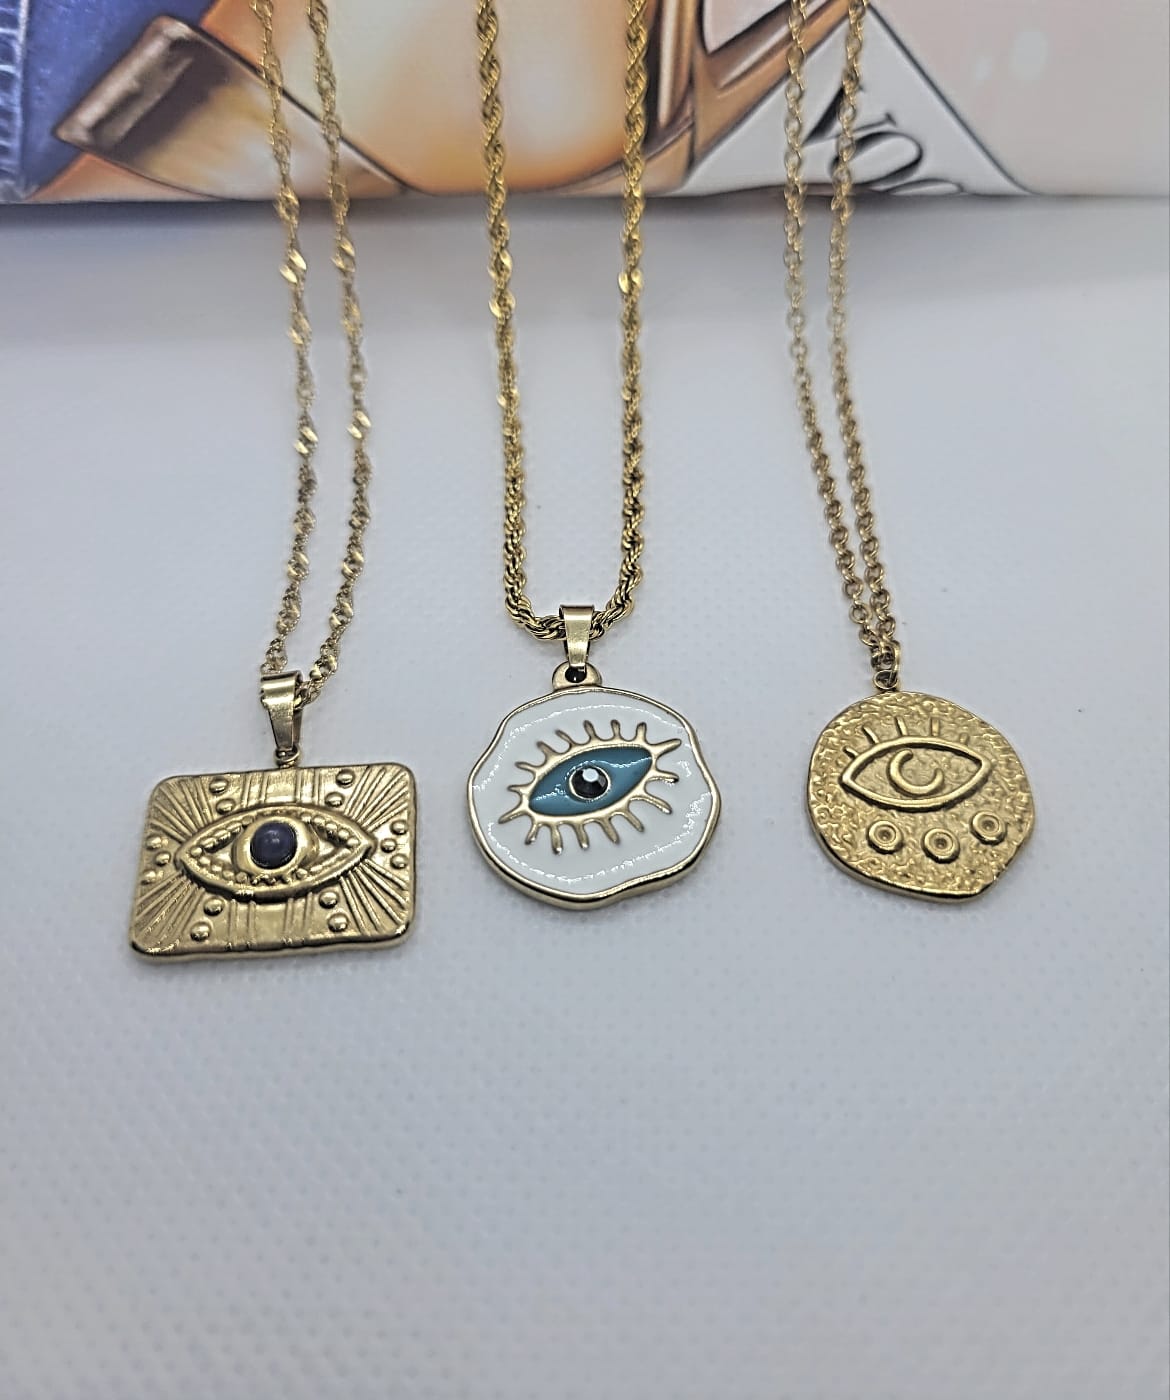 PROTECTIVE CHARM NECKLACE